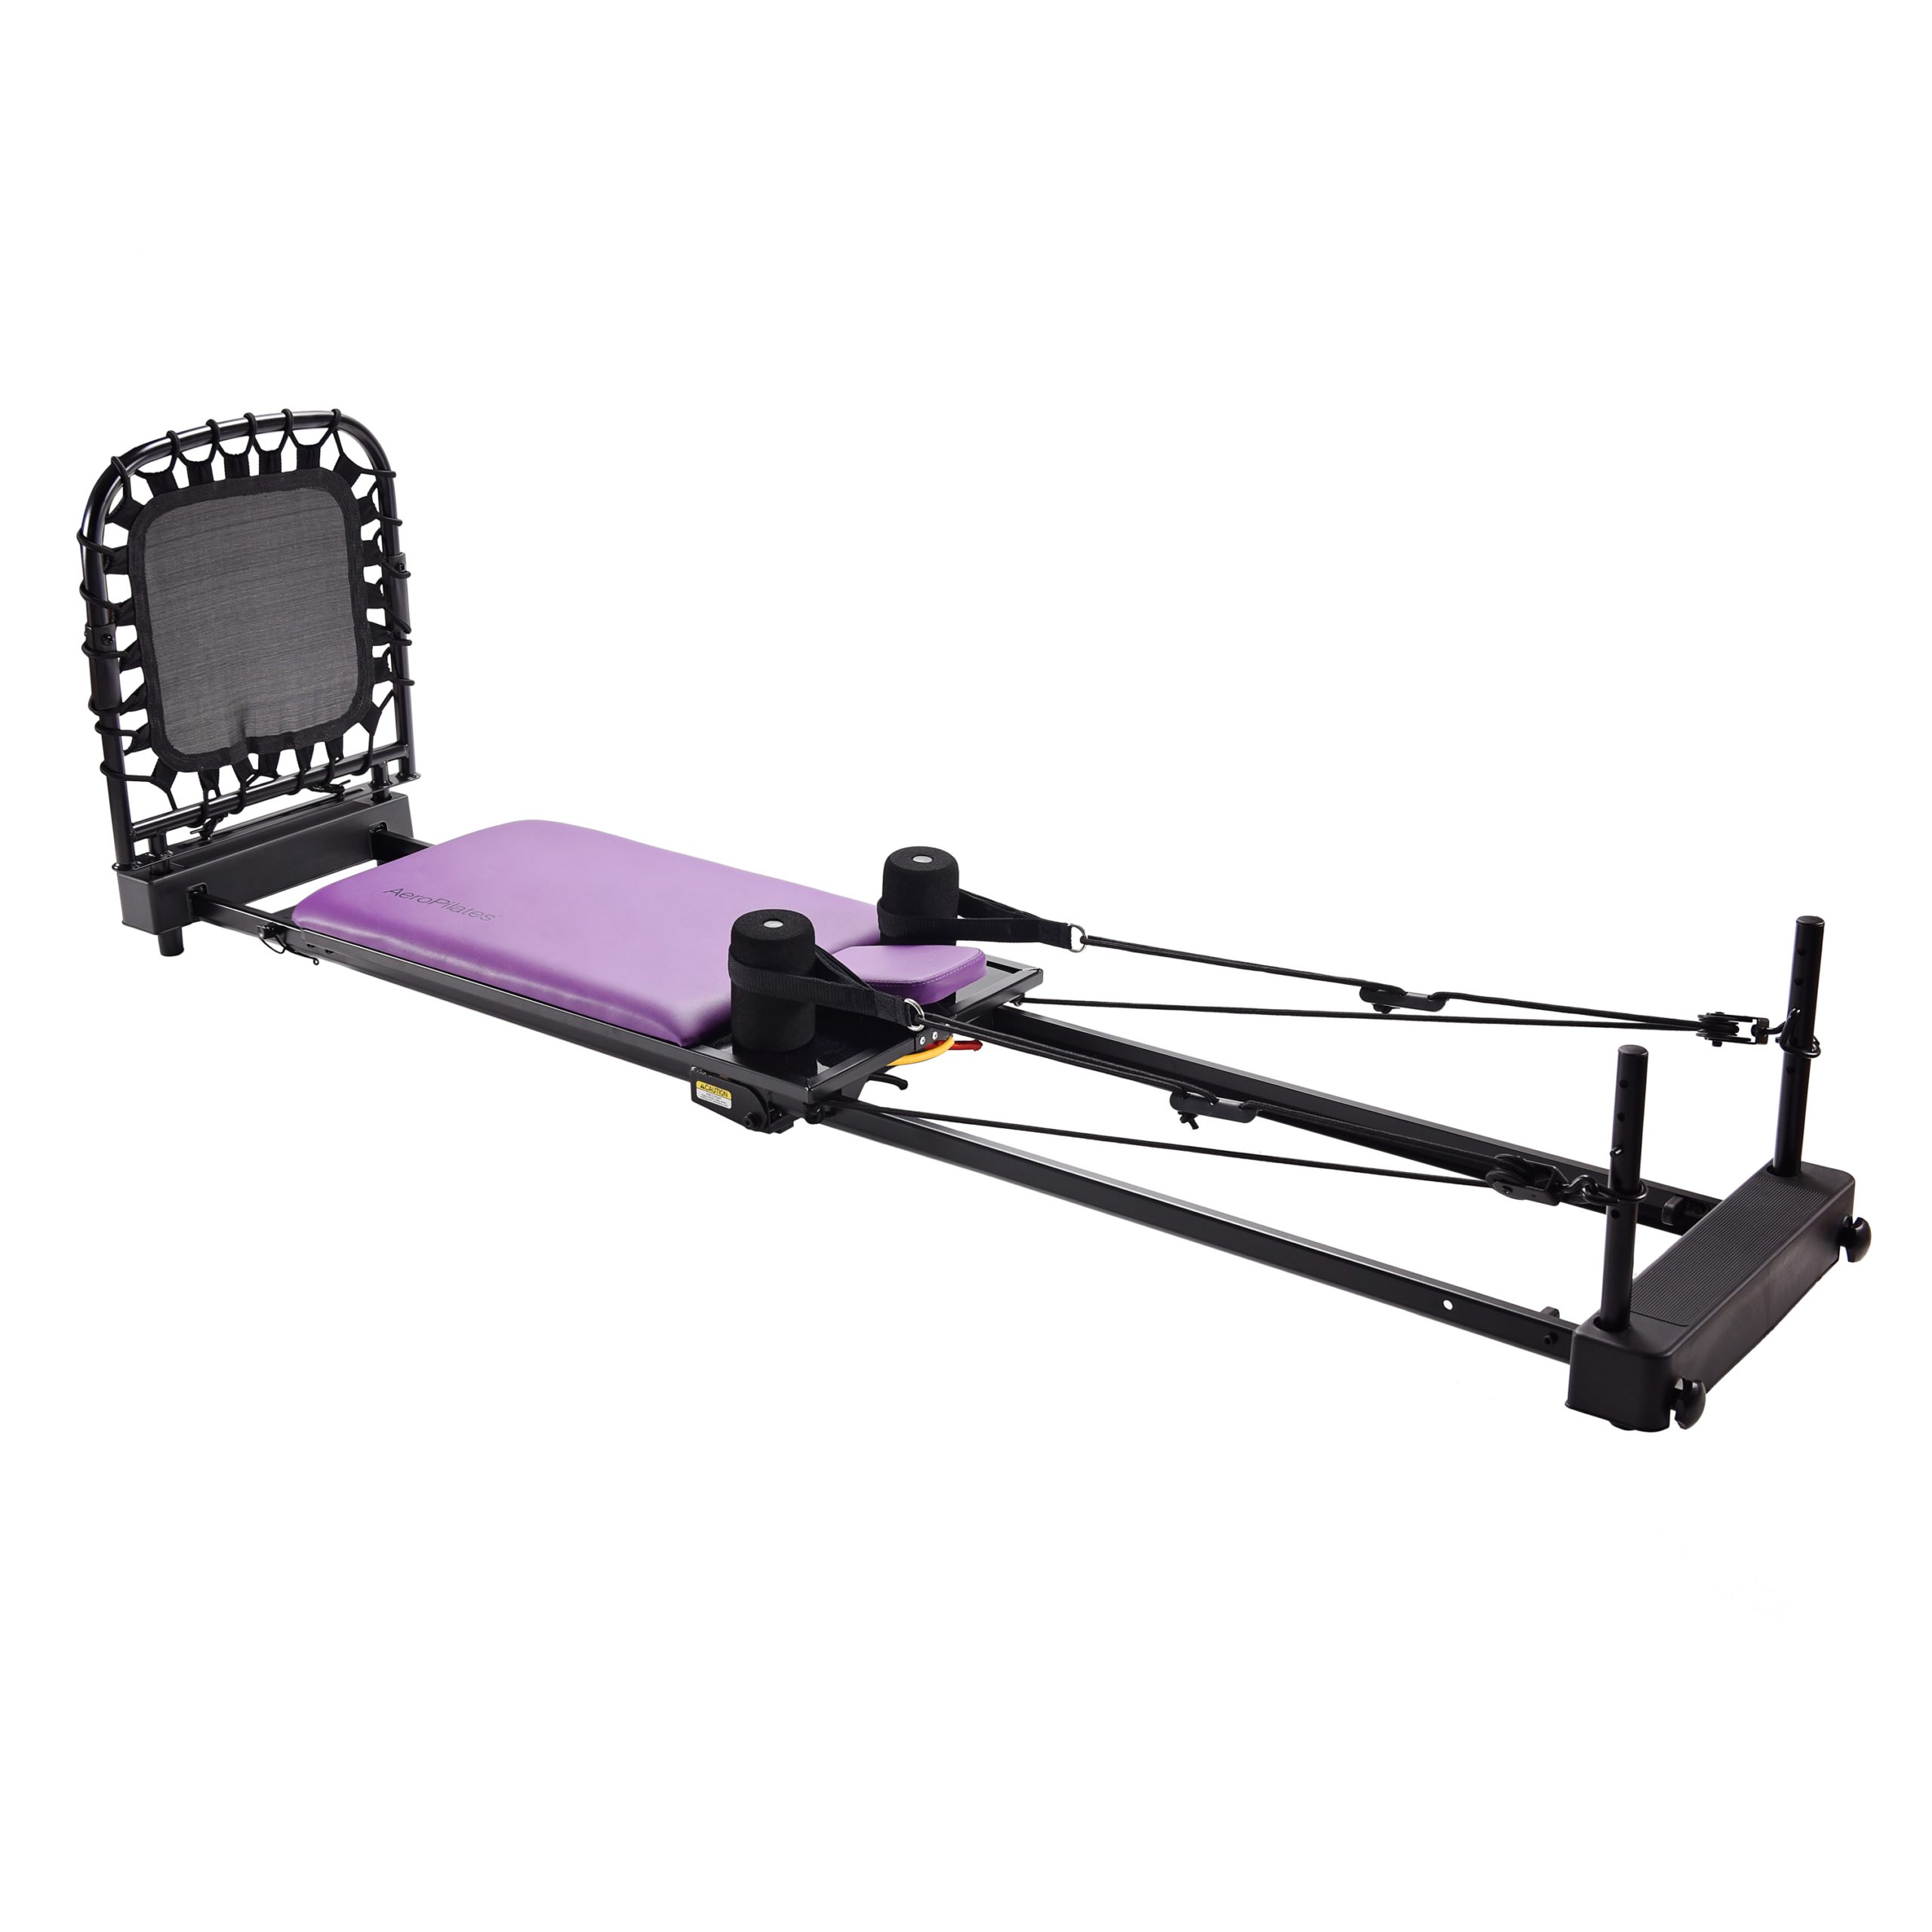 Pilates Bar Kit with 6 Resistance Bands for Working Out - Portable Pilates  Bar Stick at Home Workout Equipment - Full Body Workout Machine for Toning